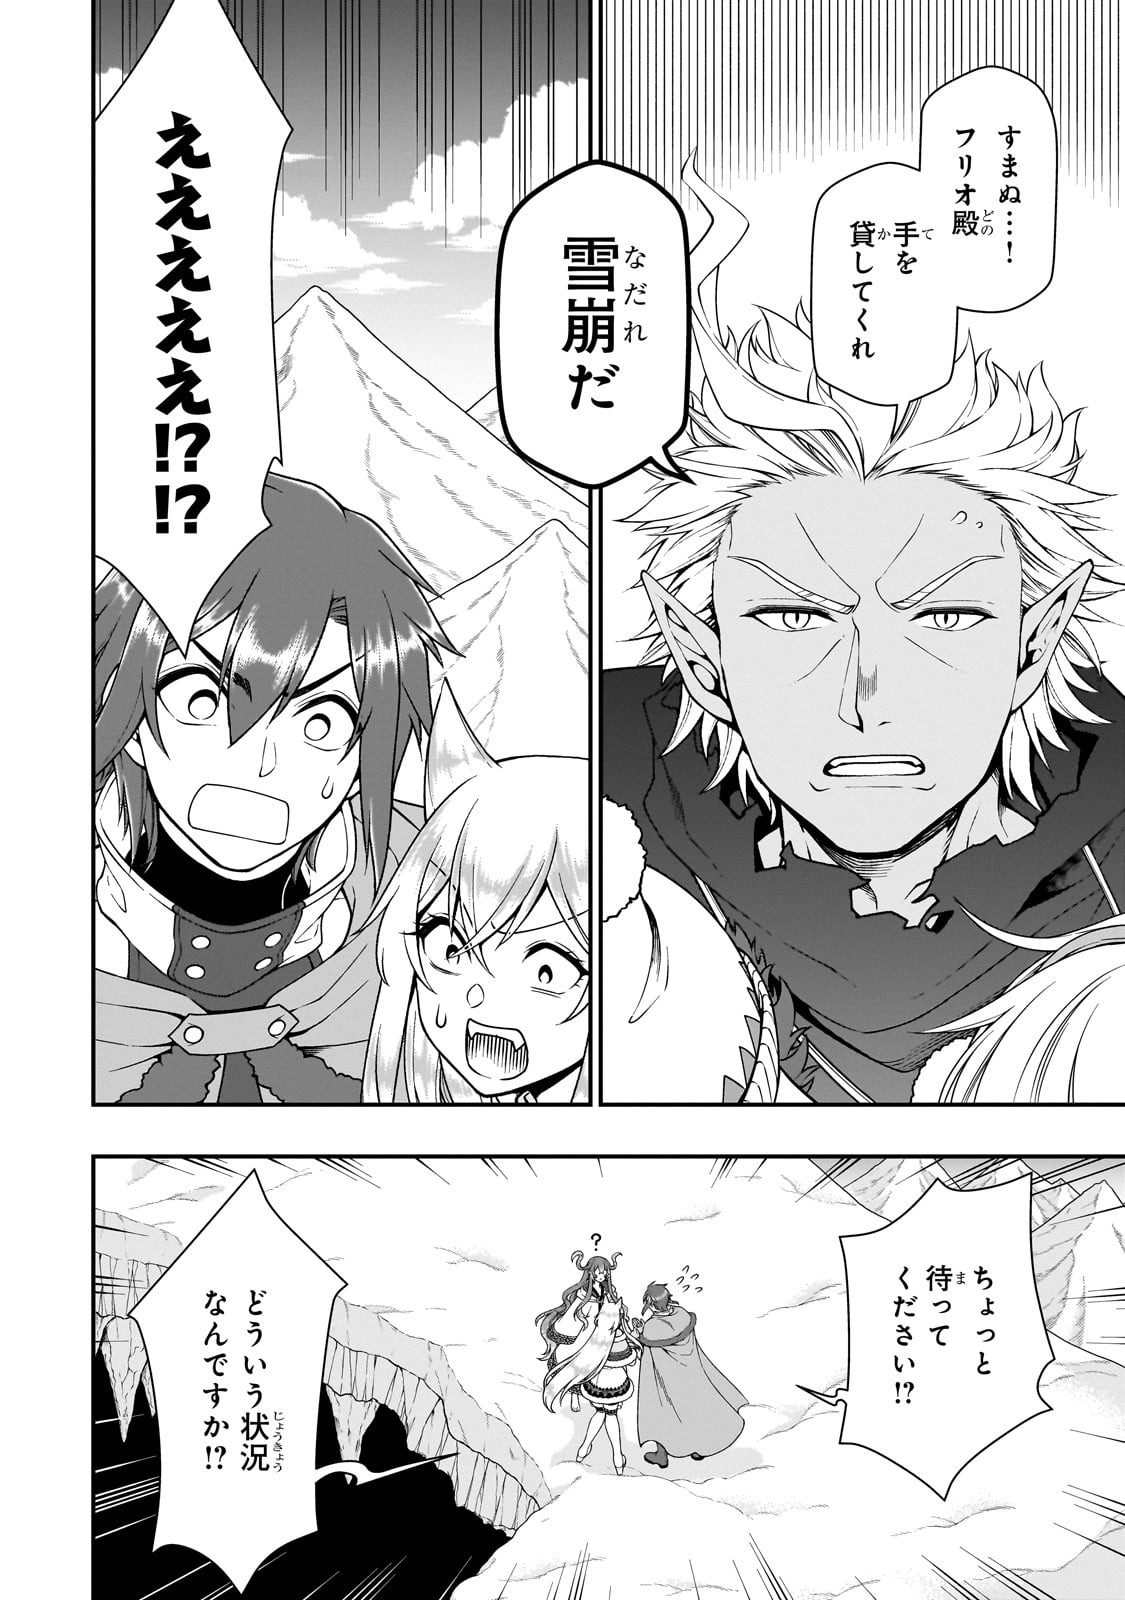 Ex-Hero Candidates, Who Turned Out To Be A Cheat From Lv2, Laid-back Life In Another World - Chapter 51 - Page 2